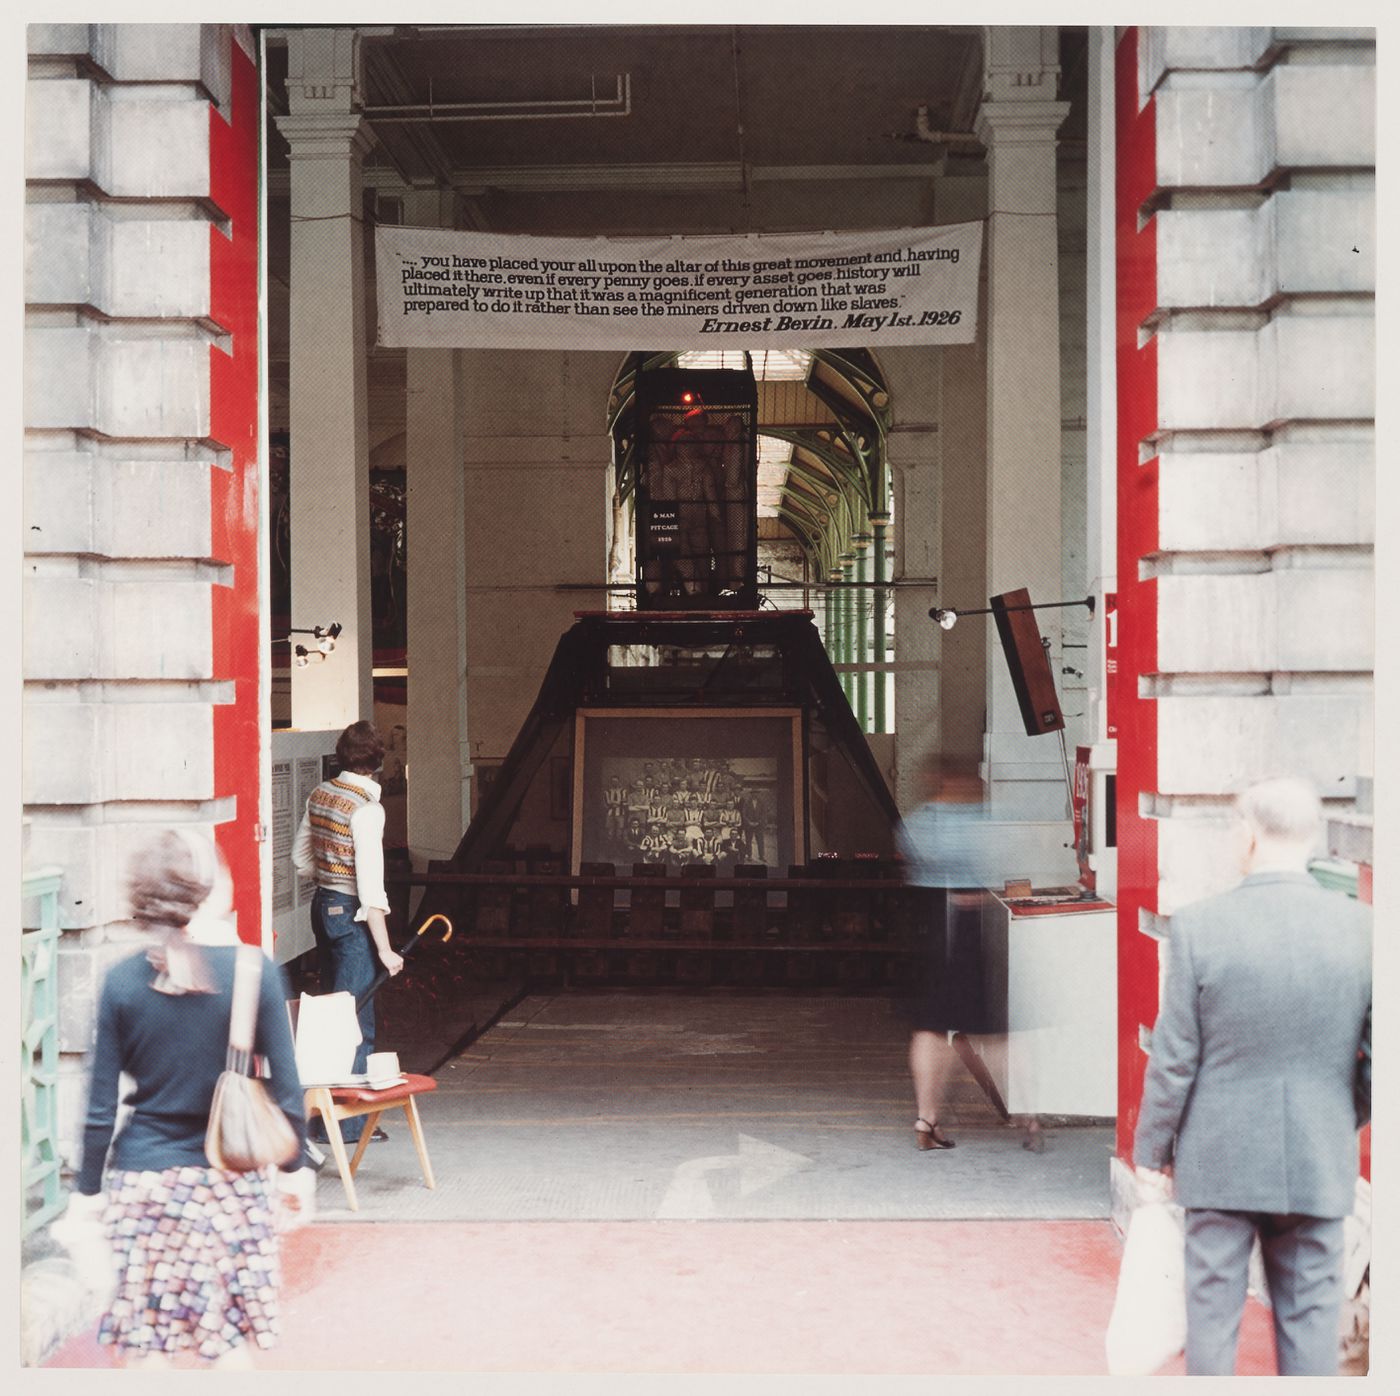 Strike: view of exhibition from entrance